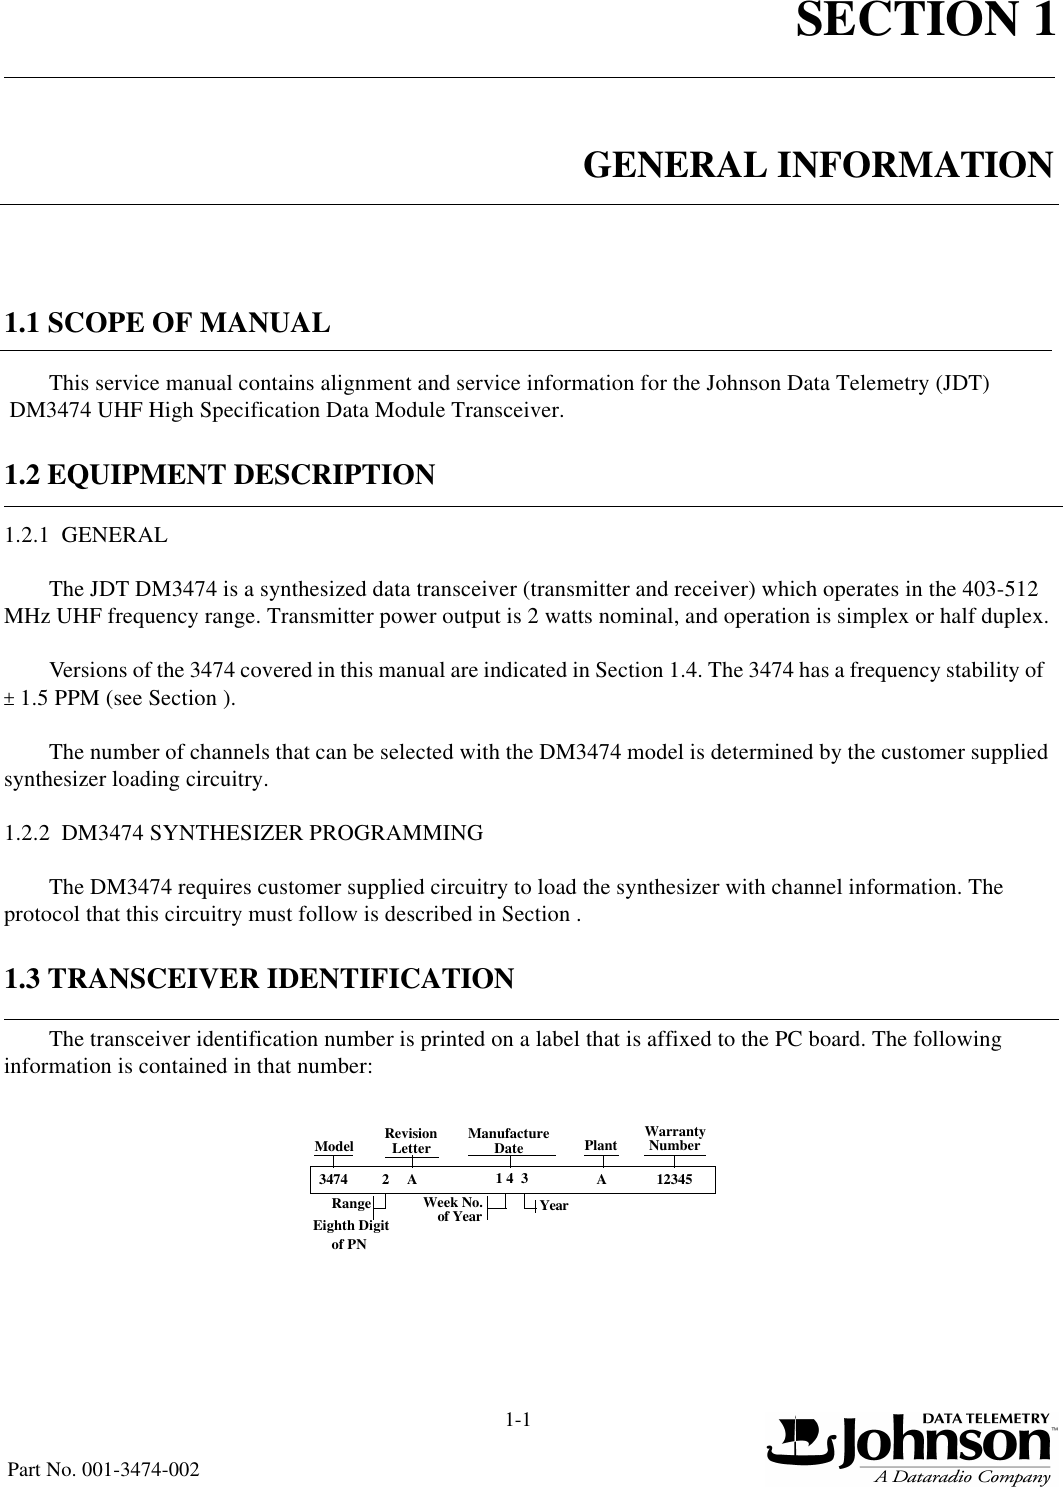 SECTION 11-1Part No. 001-3474-002GENERAL INFORMATION1.1 SCOPE OF MANUALThis service manual contains alignment and service information for the Johnson Data Telemetry (JDT) DM3474 UHF High Specification Data Module Transceiver.1.2 EQUIPMENT DESCRIPTION1.2.1  GENERALThe JDT DM3474 is a synthesized data transceiver (transmitter and receiver) which operates in the 403-512 MHz UHF frequency range. Transmitter power output is 2 watts nominal, and operation is simplex or half duplex.Versions of the 3474 covered in this manual are indicated in Section 1.4. The 3474 has a frequency stability of  ± 1.5 PPM (see Section ).The number of channels that can be selected with the DM3474 model is determined by the customer supplied synthesizer loading circuitry.1.2.2  DM3474 SYNTHESIZER PROGRAMMINGThe DM3474 requires customer supplied circuitry to load the synthesizer with channel information. The protocol that this circuitry must follow is described in Section .1.3 TRANSCEIVER IDENTIFICATIONThe transceiver identification number is printed on a label that is affixed to the PC board. The following information is contained in that number:3474 2A1 4  3 A12345Model RevisionLetter ManufactureDateWeek No.of Year YearPlant WarrantyNumberEighth Digitof PNRange